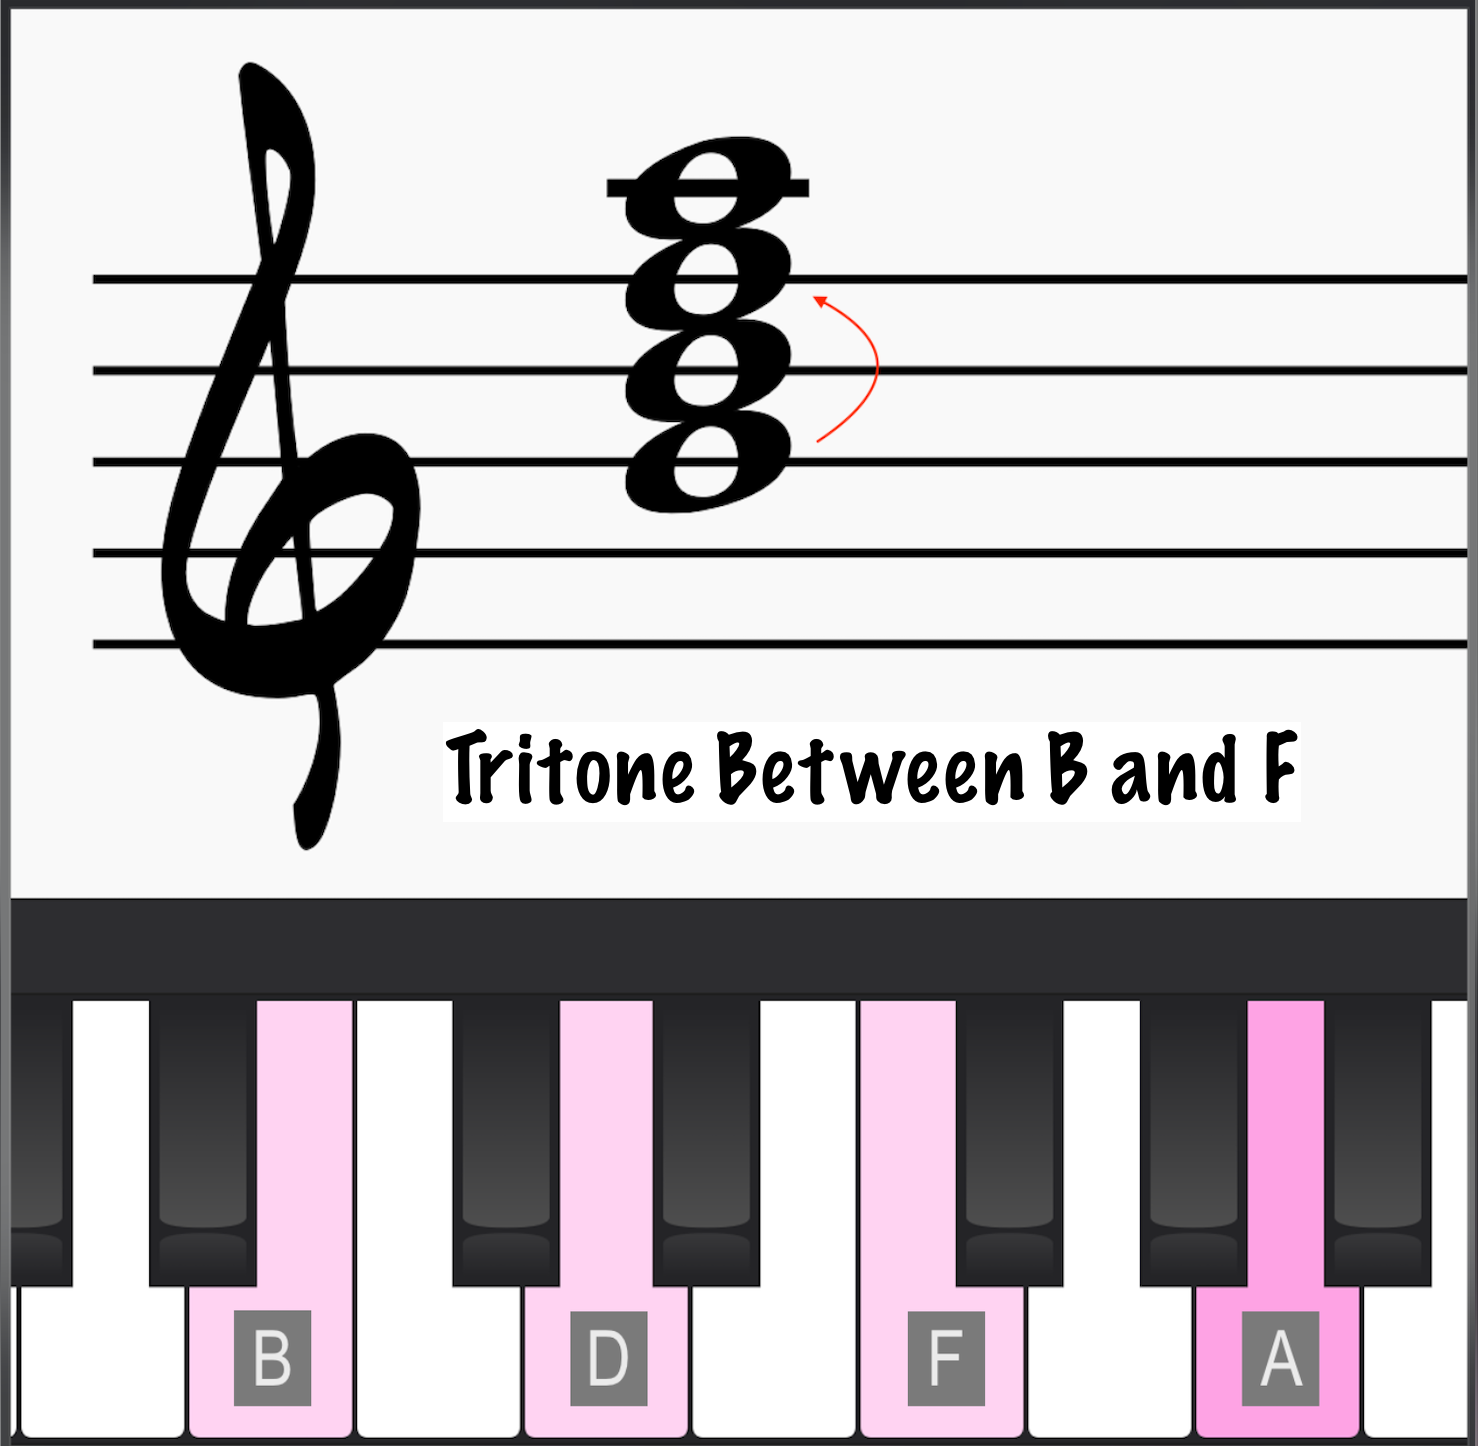 B-7b5 chord showing the tritone between lower note B and upper note F